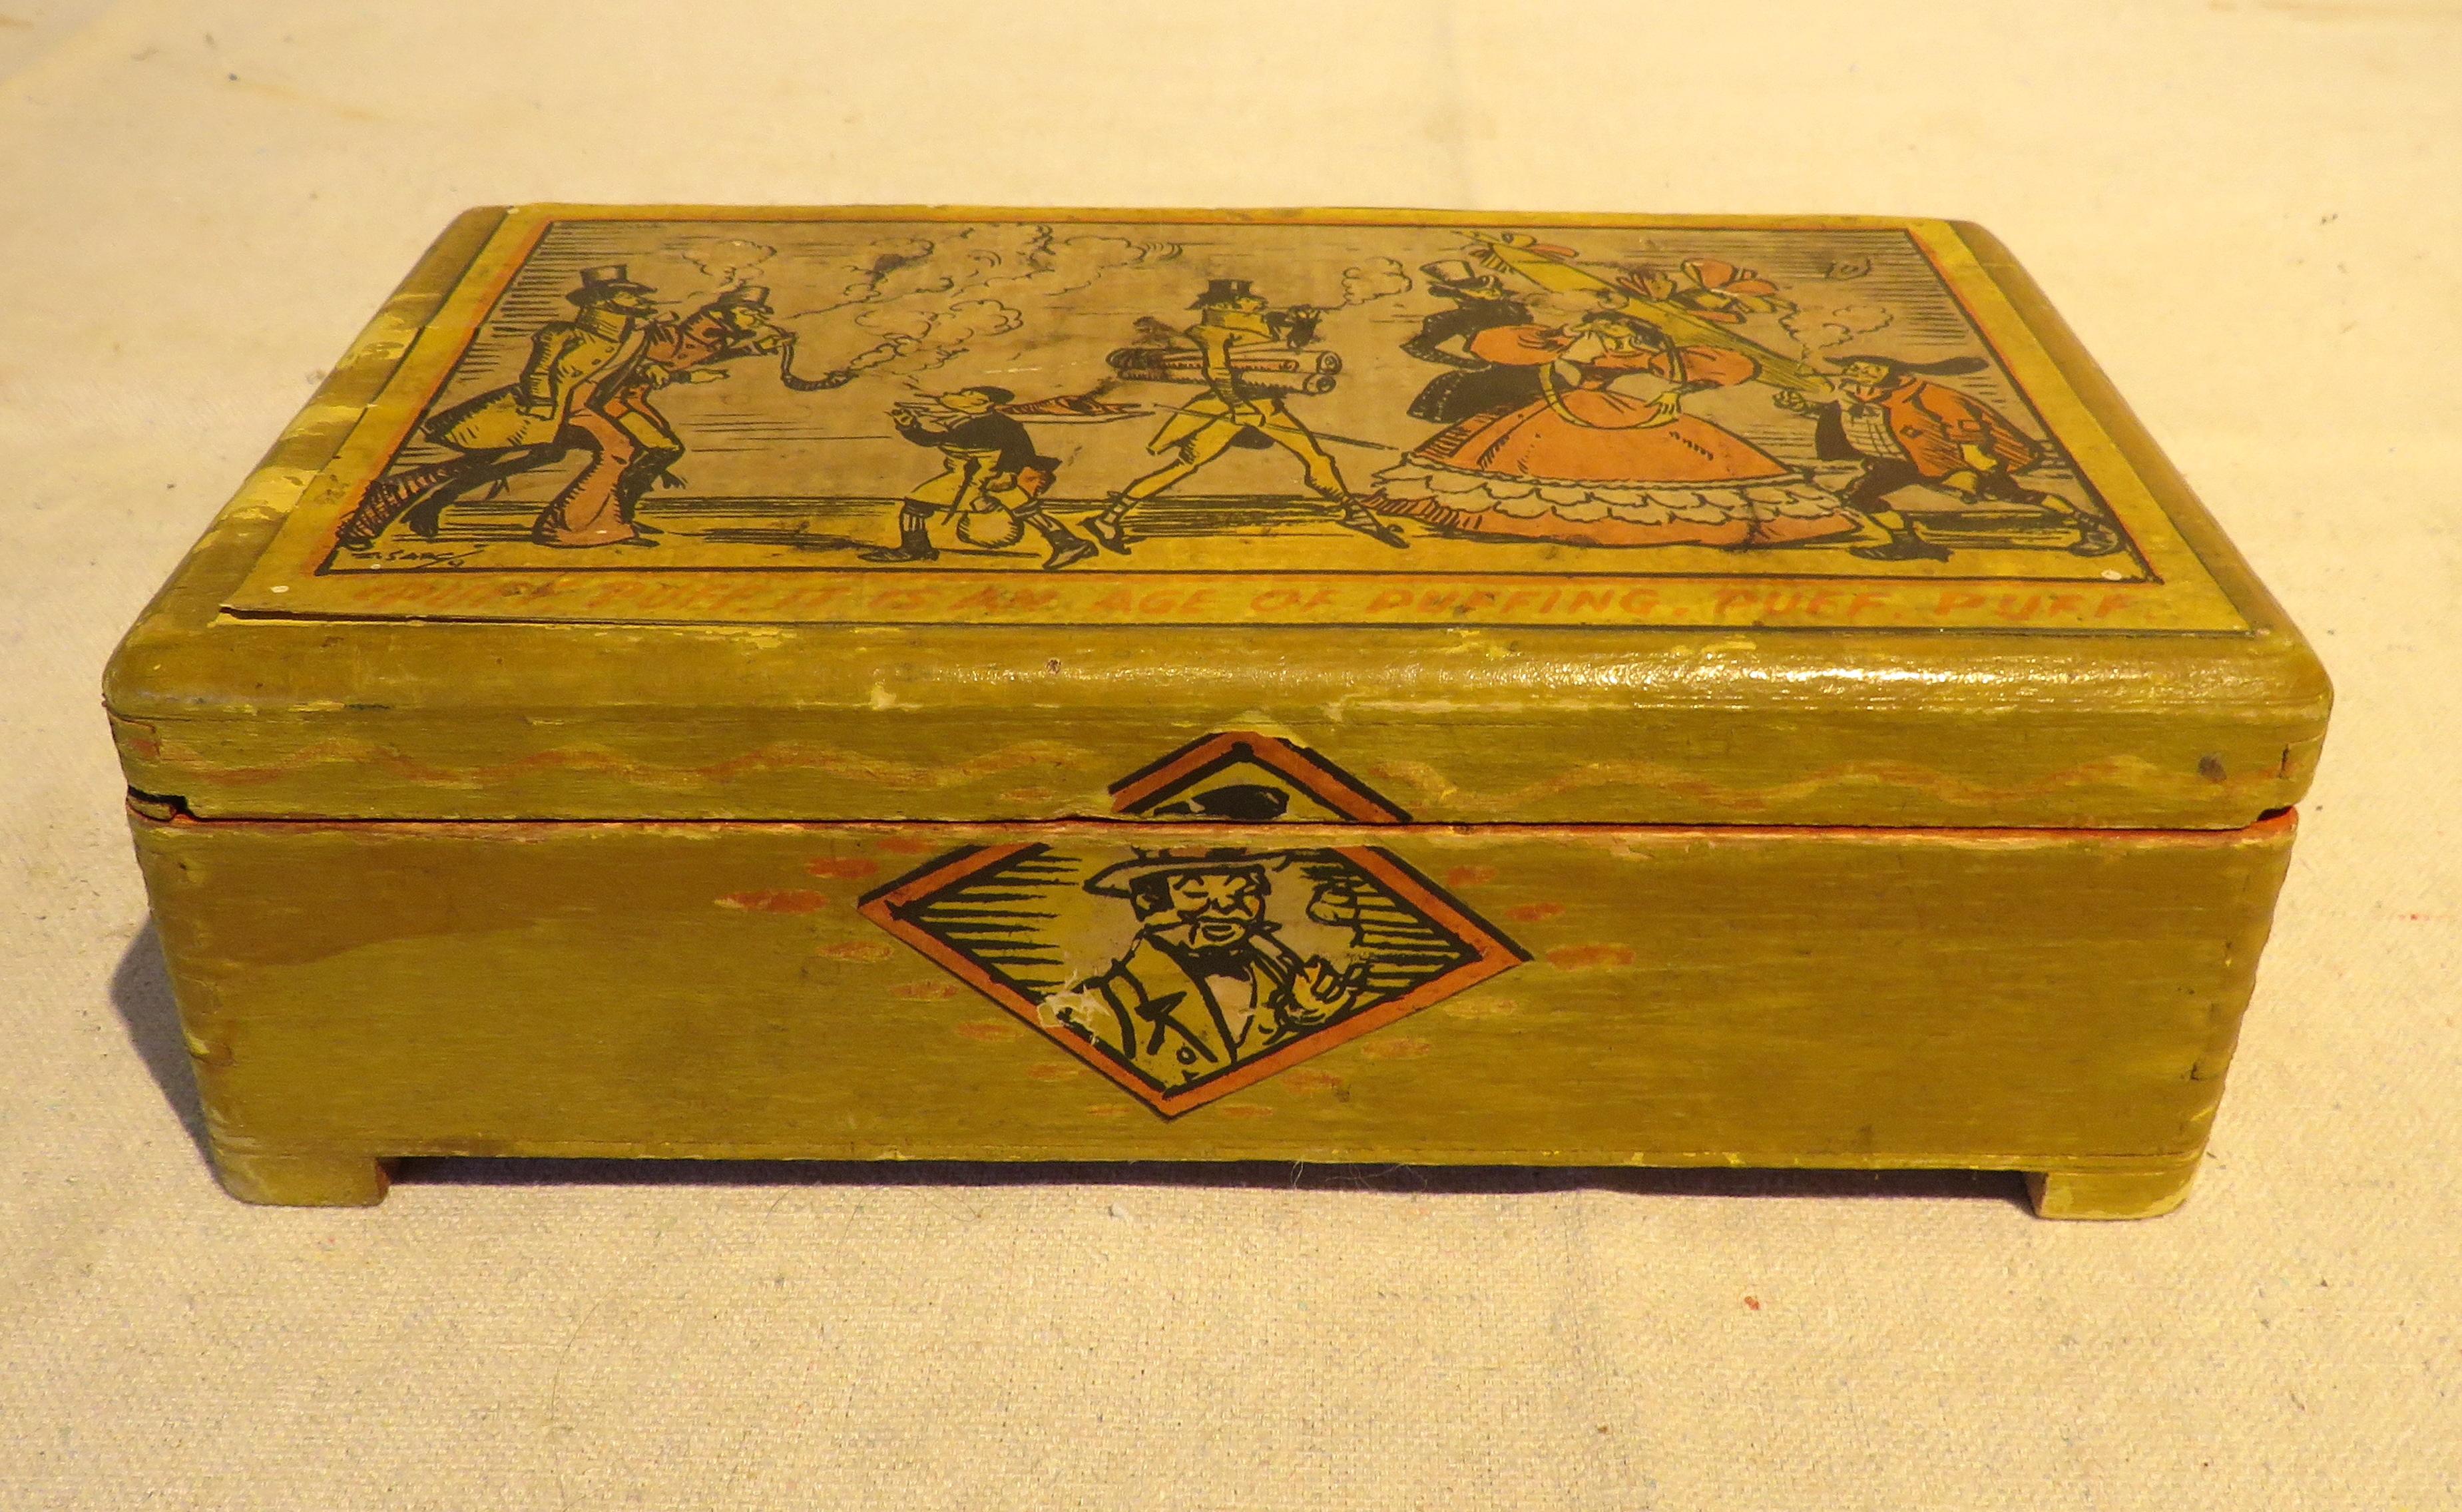 Collectible lift-top wooden box with lithograph applied to lid reading 